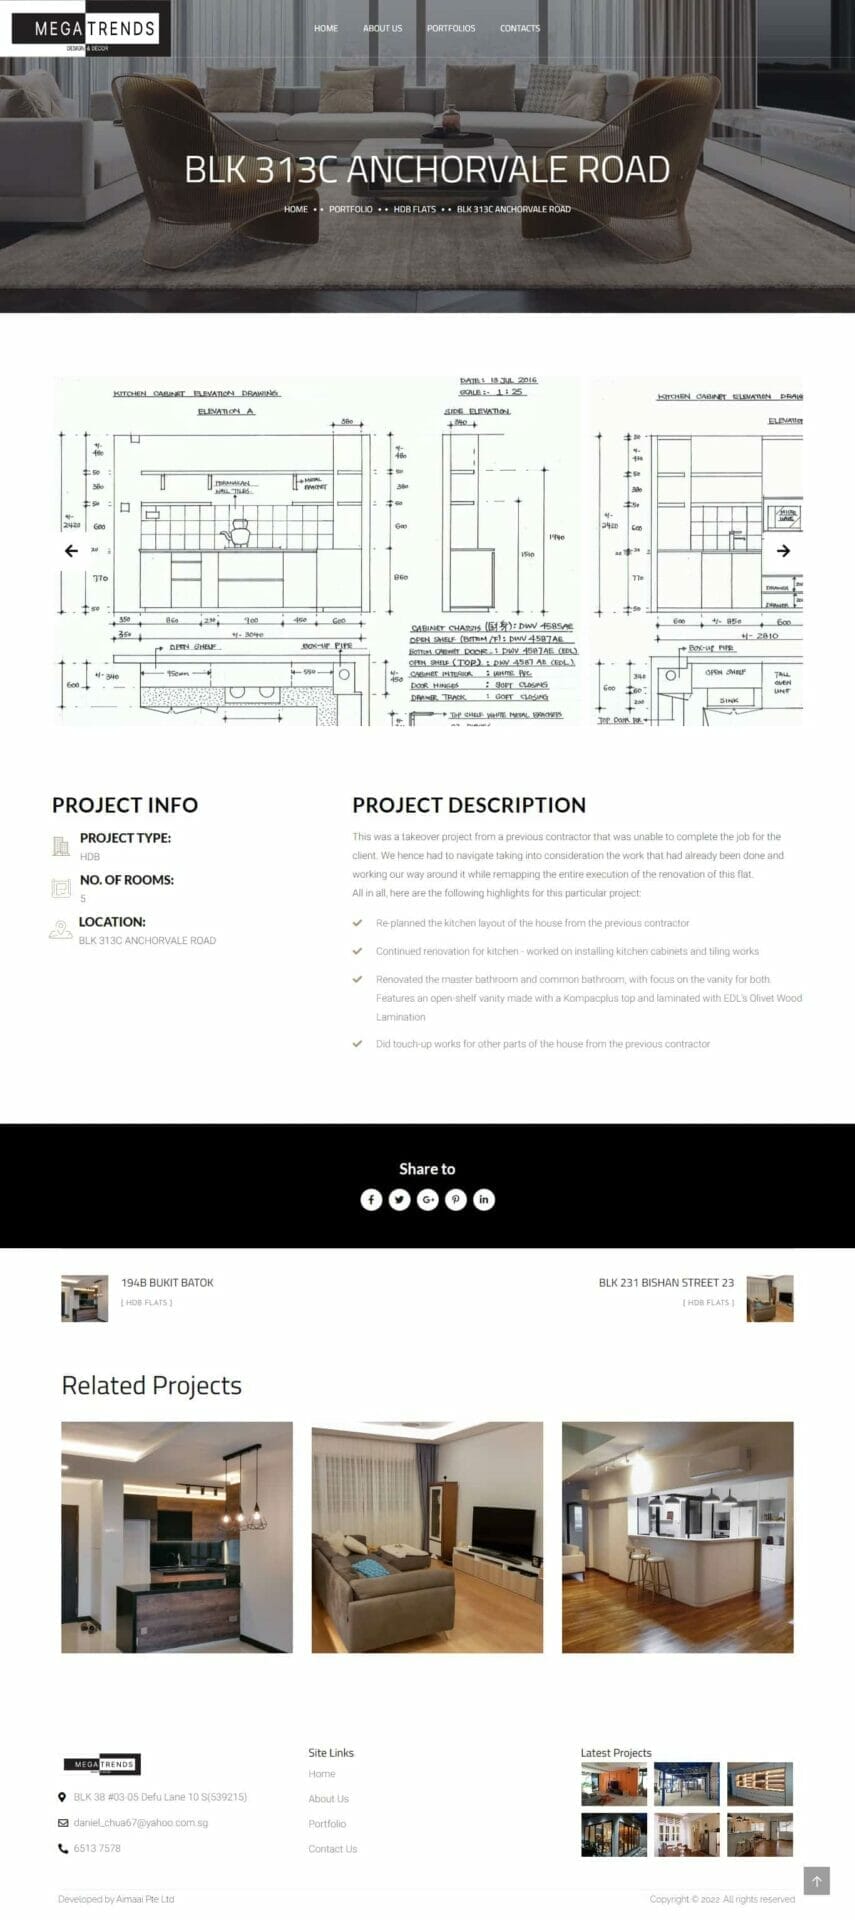 A WordPress website design for a construction company that includes web consultation and template-based web development.